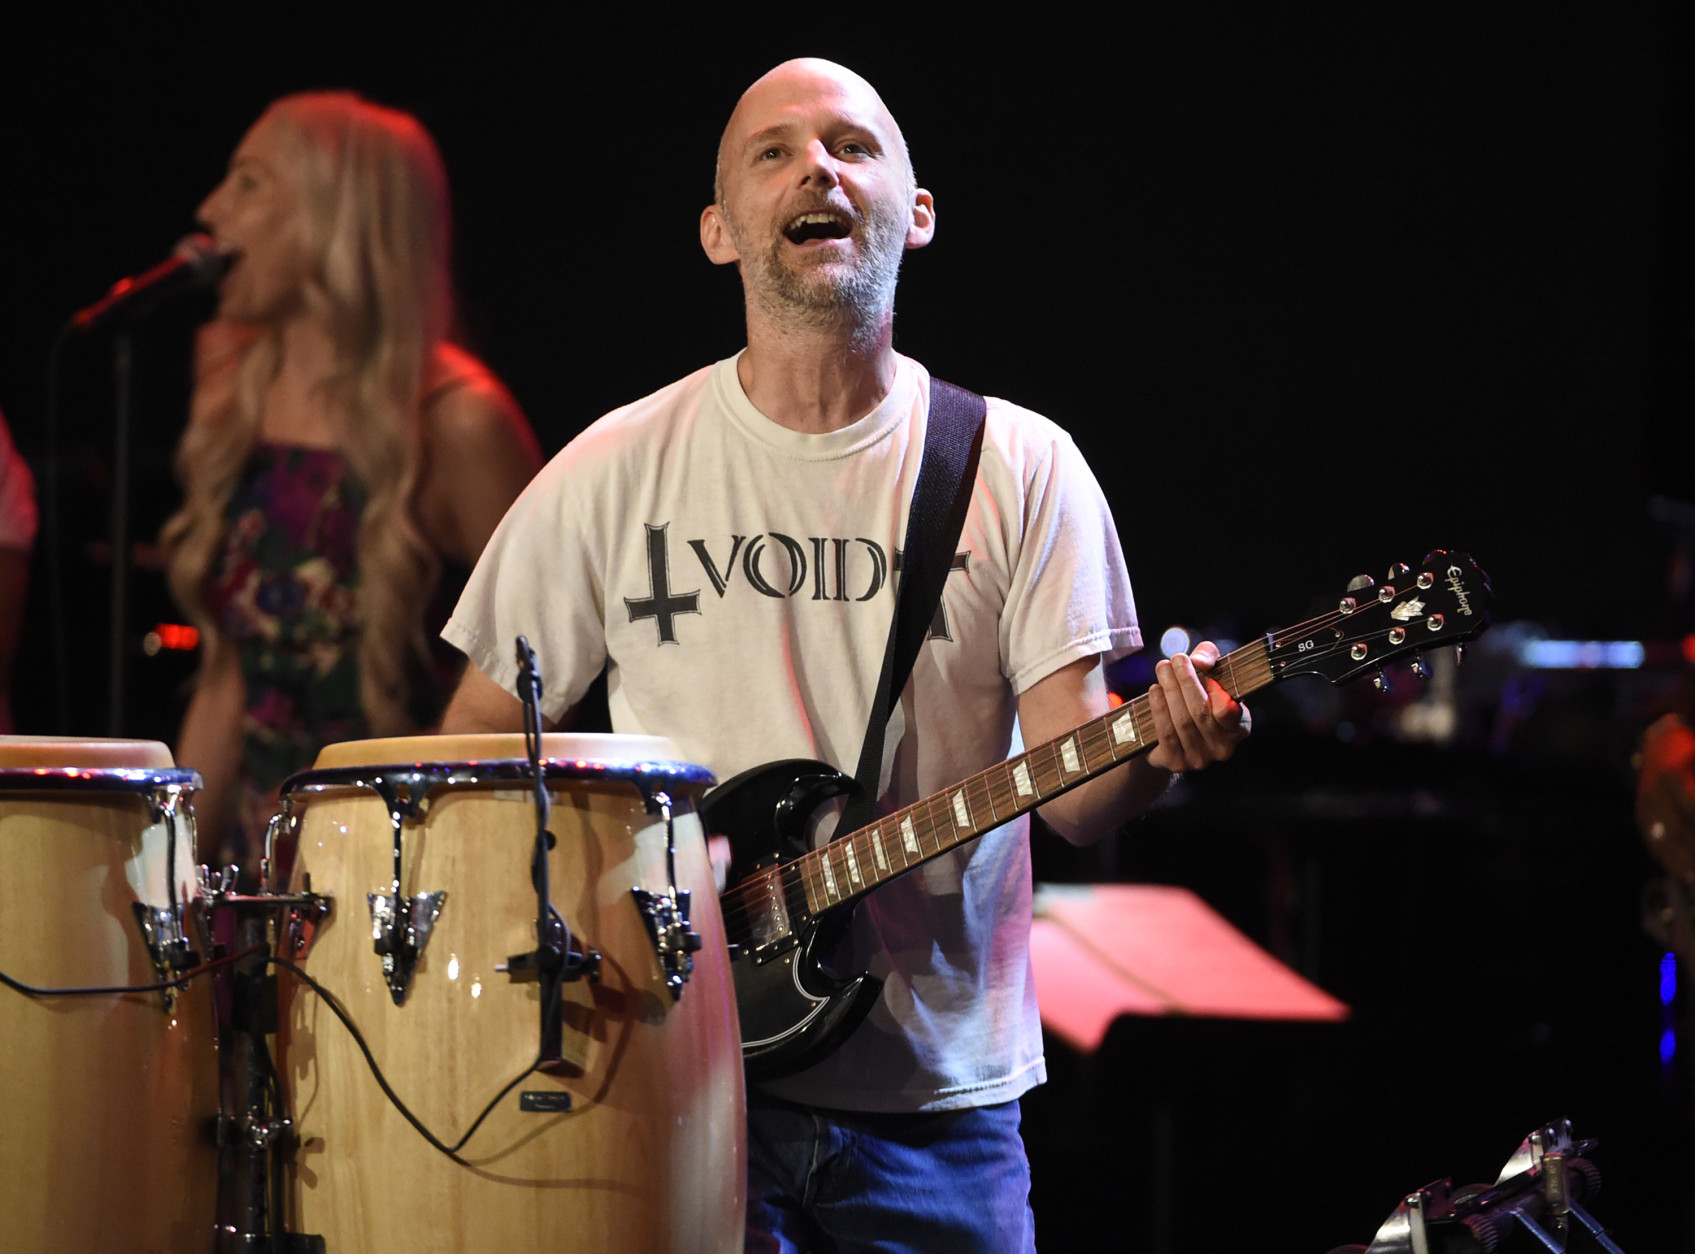 Moby performs at the David Lynch Foundation Music Celebration at the Theatre at Ace Hotel on Wednesday, April 1, 2015, in Los Angeles. (Photo by Chris Pizzello/Invision/AP)